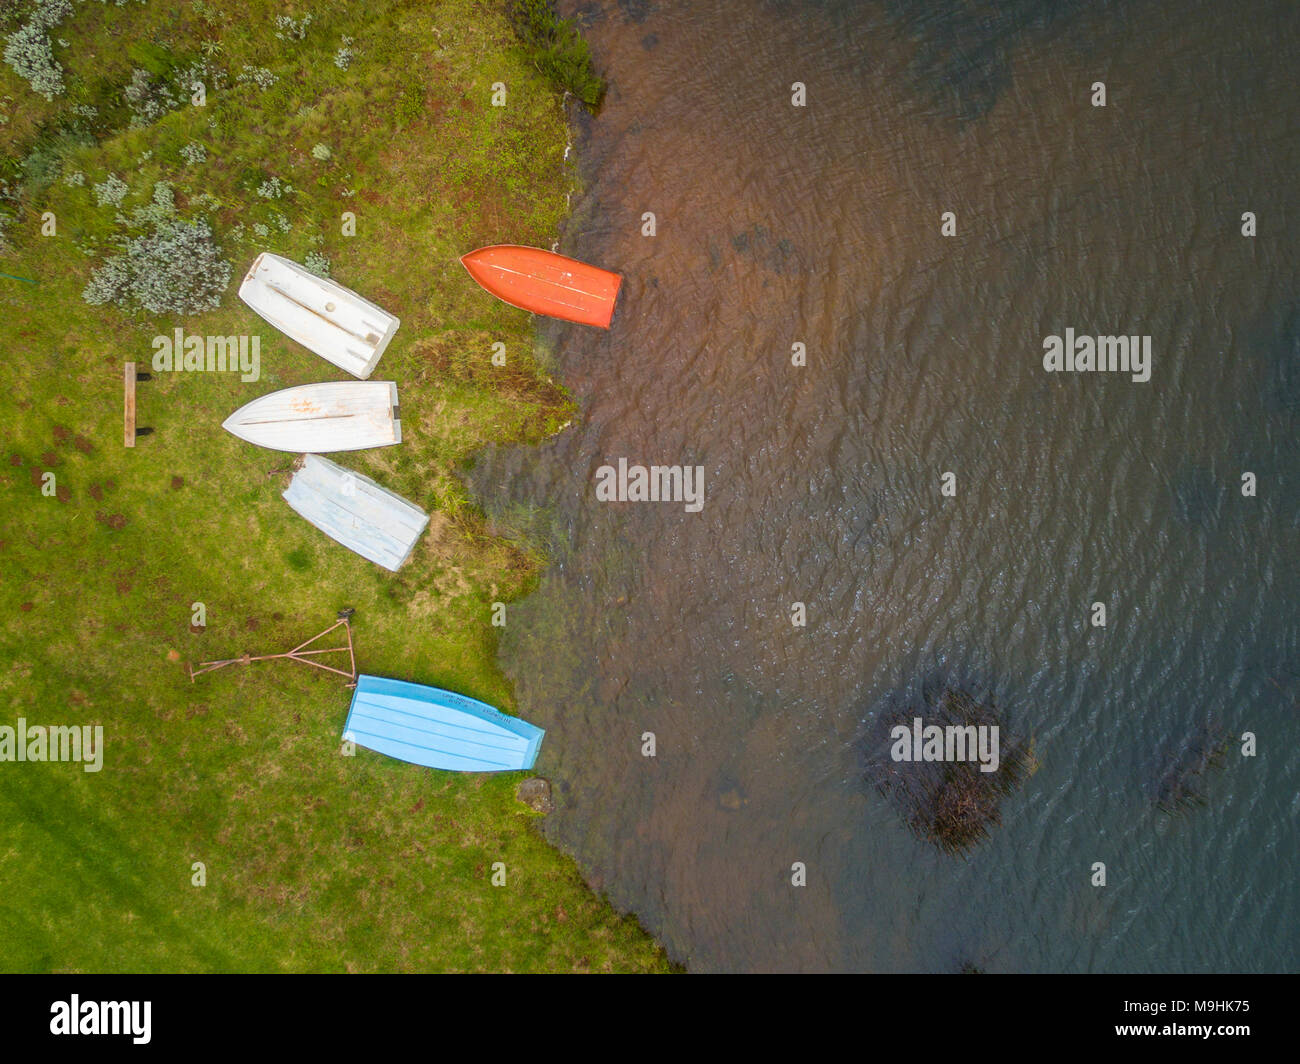 Boats are seen from above in this aerial picture in Zimbabwe's Nyanga. Stock Photo